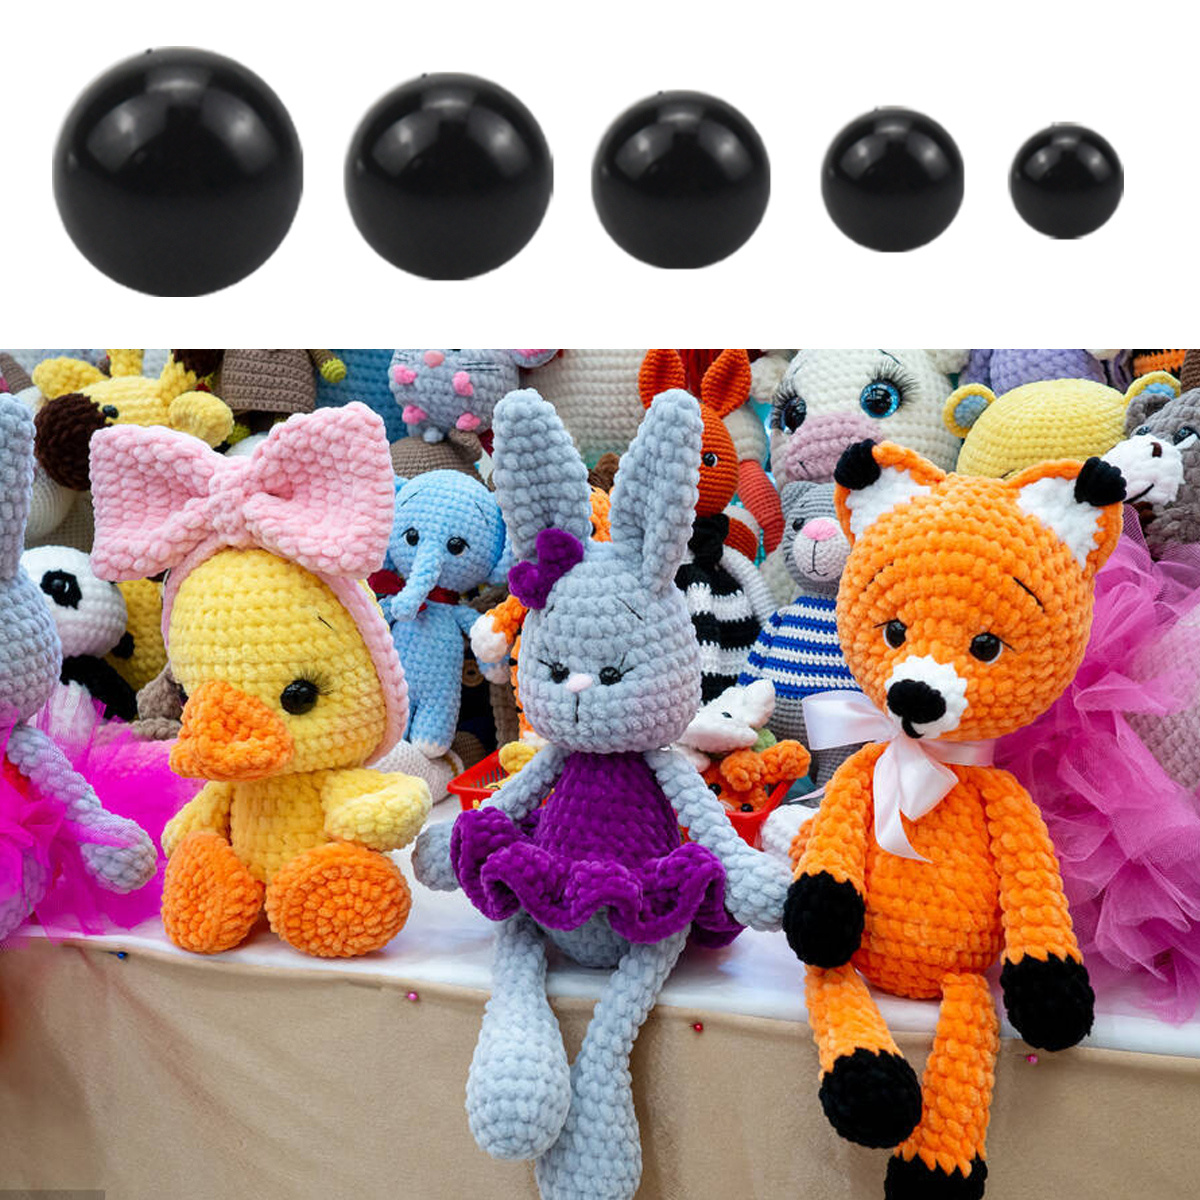 Safety Eyes for Crochet Plastic Colorful with Washers Black